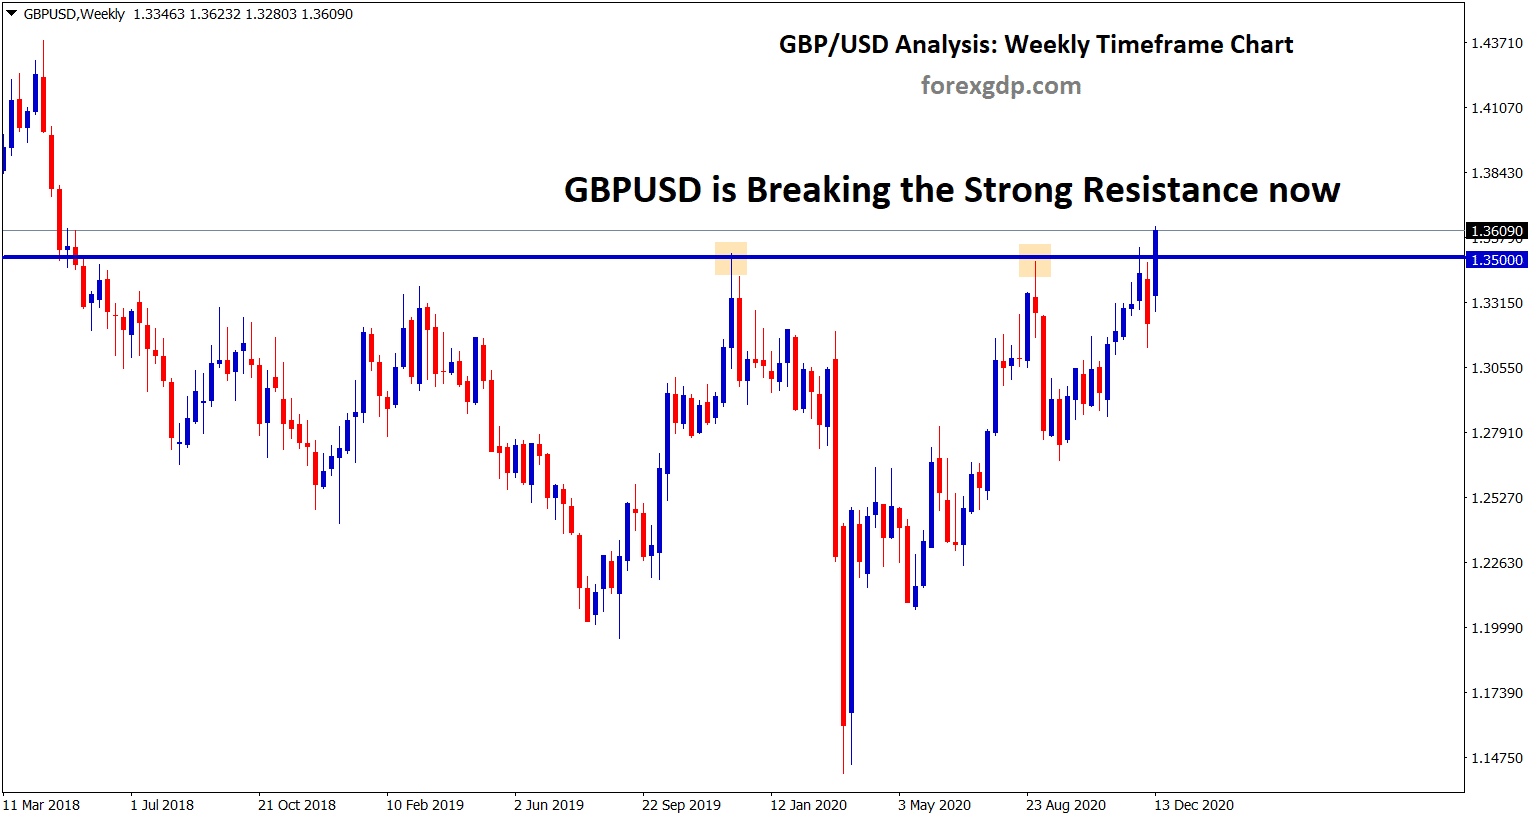 gbpusd breaking the strong resistance 1.3500